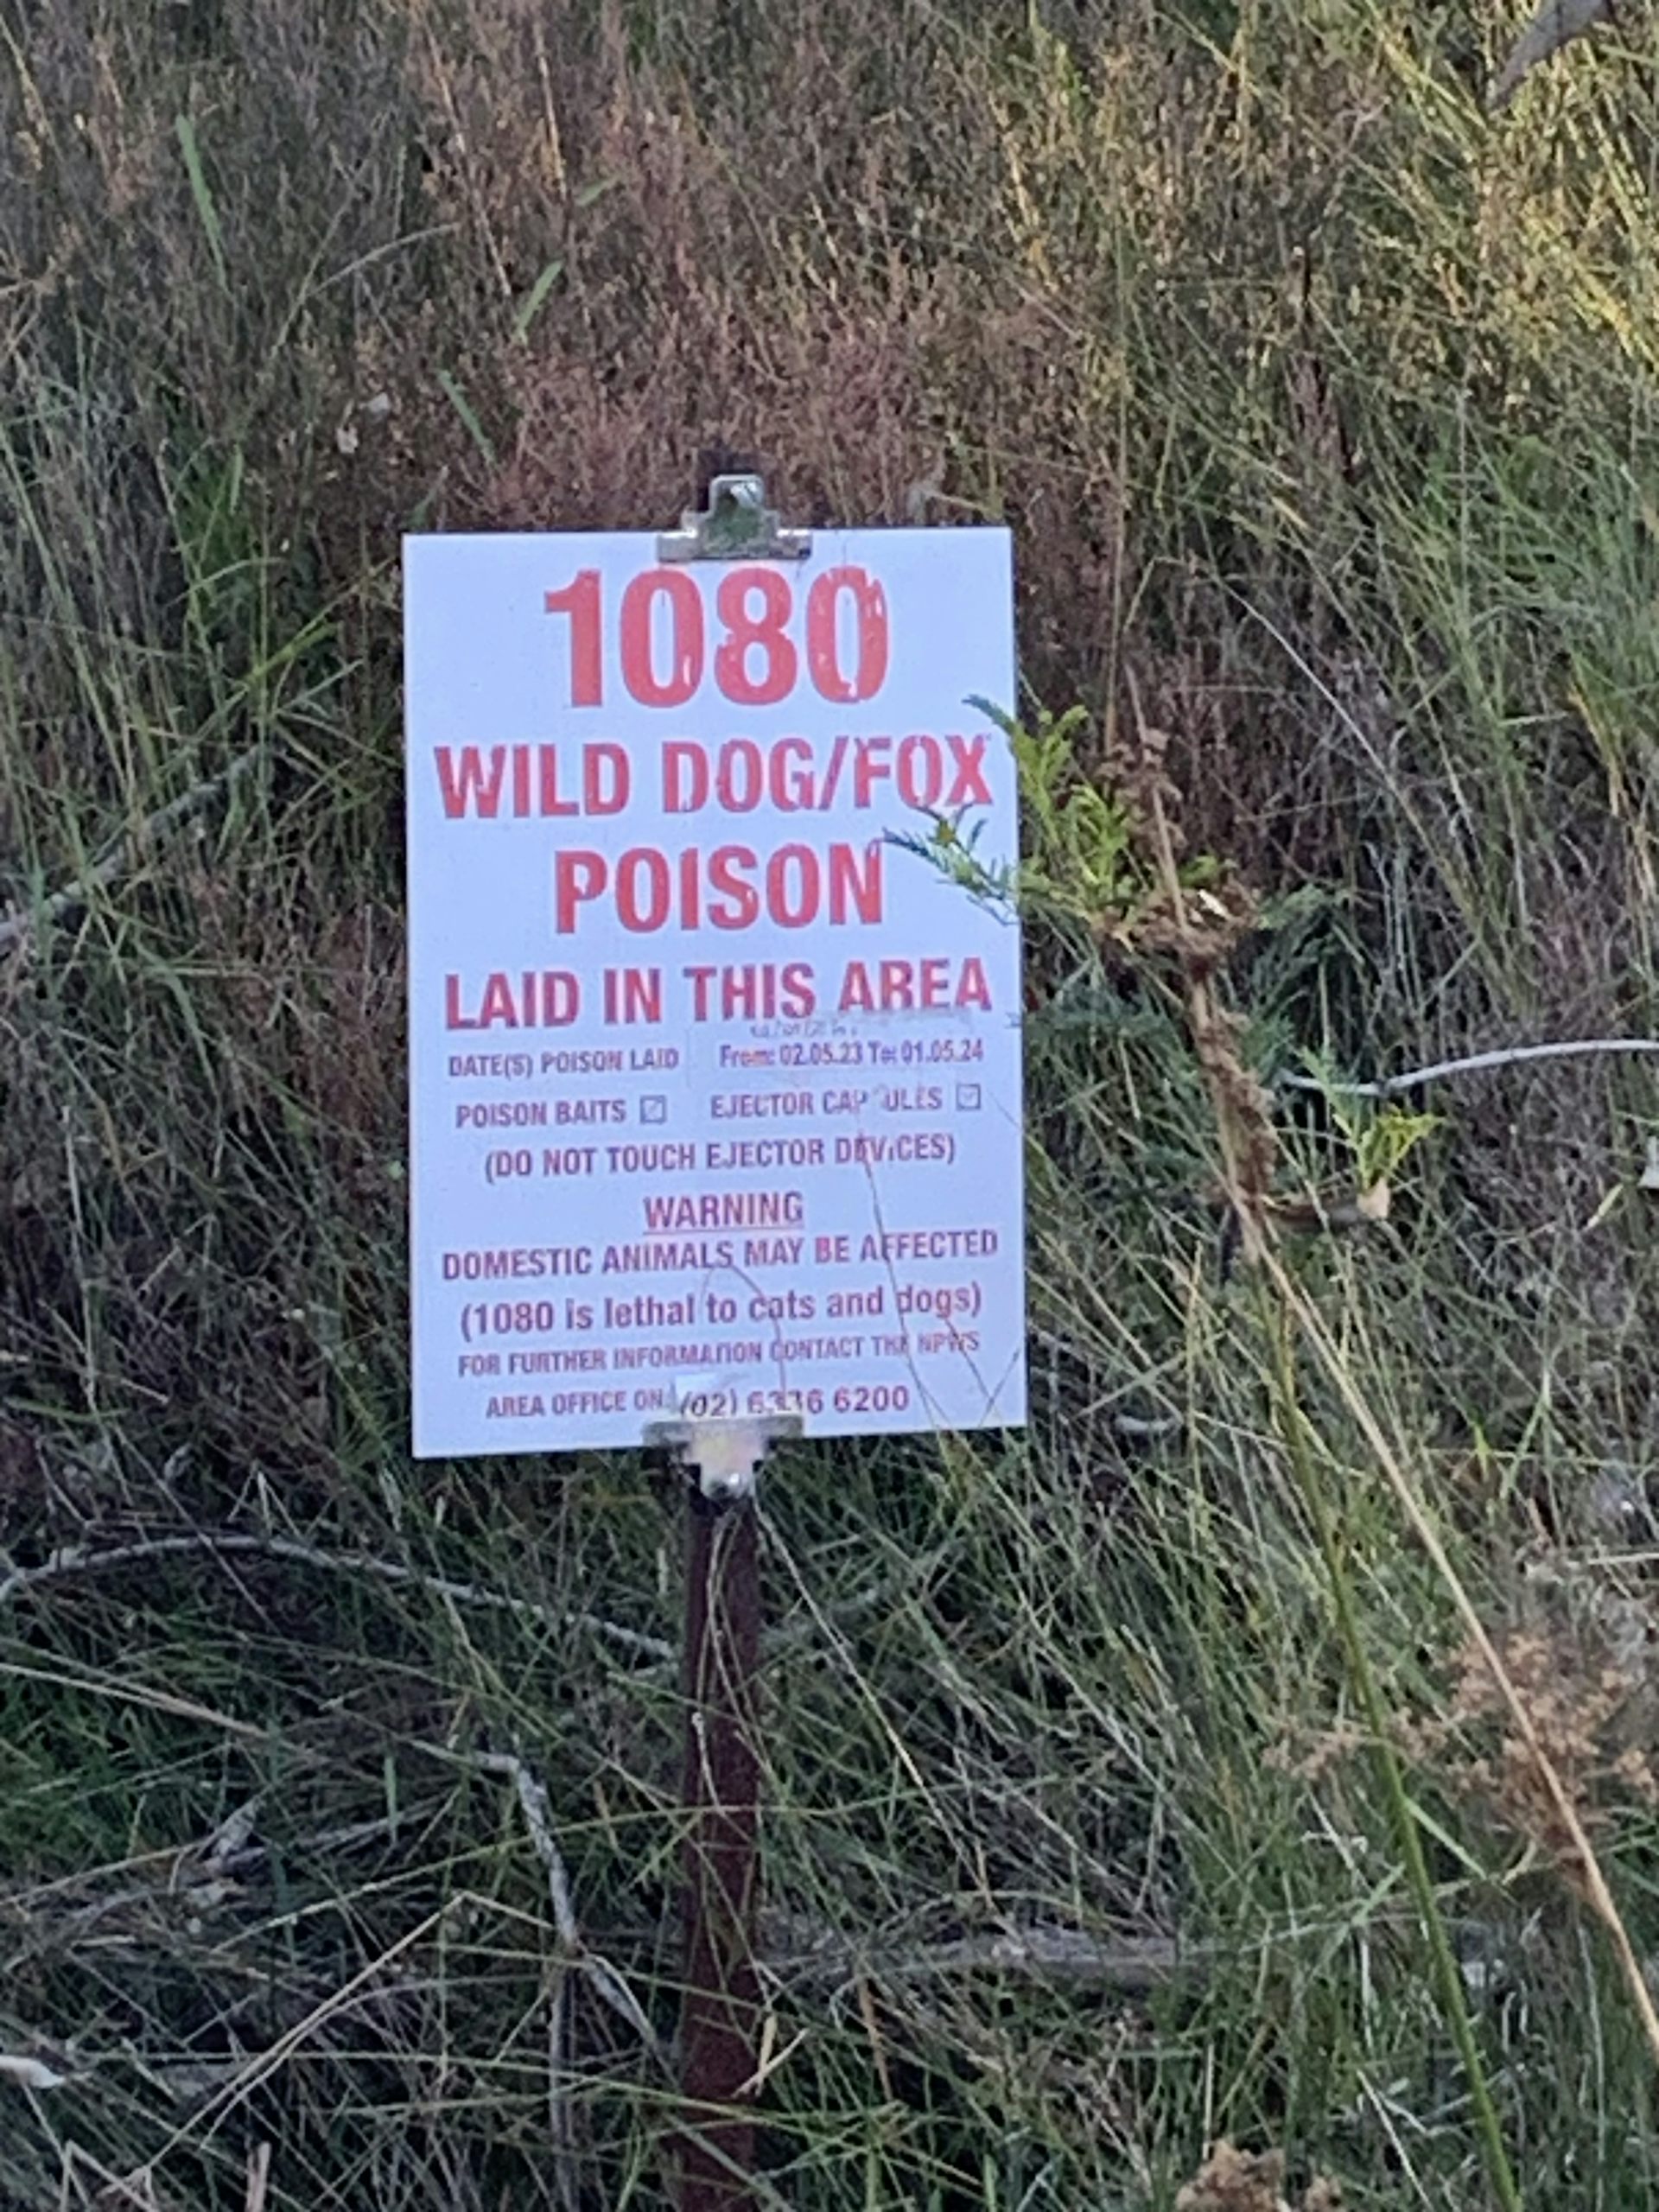 A white sign with red text stating that 1080 wild dog and fox poison baits are laid in the area.